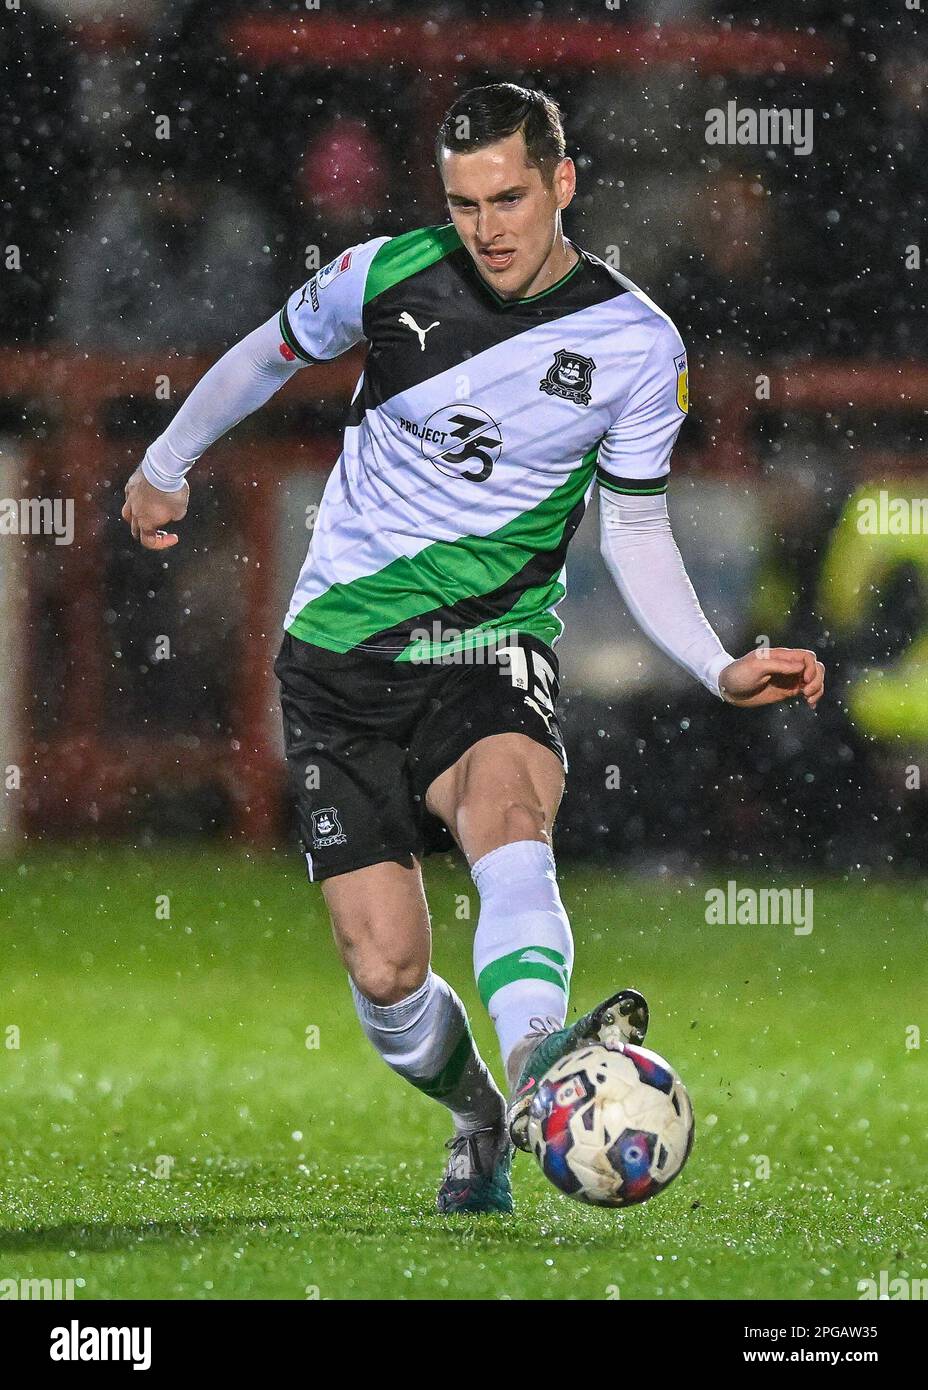 Conor Grant #15 of Plymouth Argyle passes the ball forward during the Sky Bet League 1 match Accrington Stanley vs Plymouth Argyle at Wham Stadium, Accrington, United Kingdom, 21st March 2023  (Photo by Stan Kasala/News Images) Stock Photo